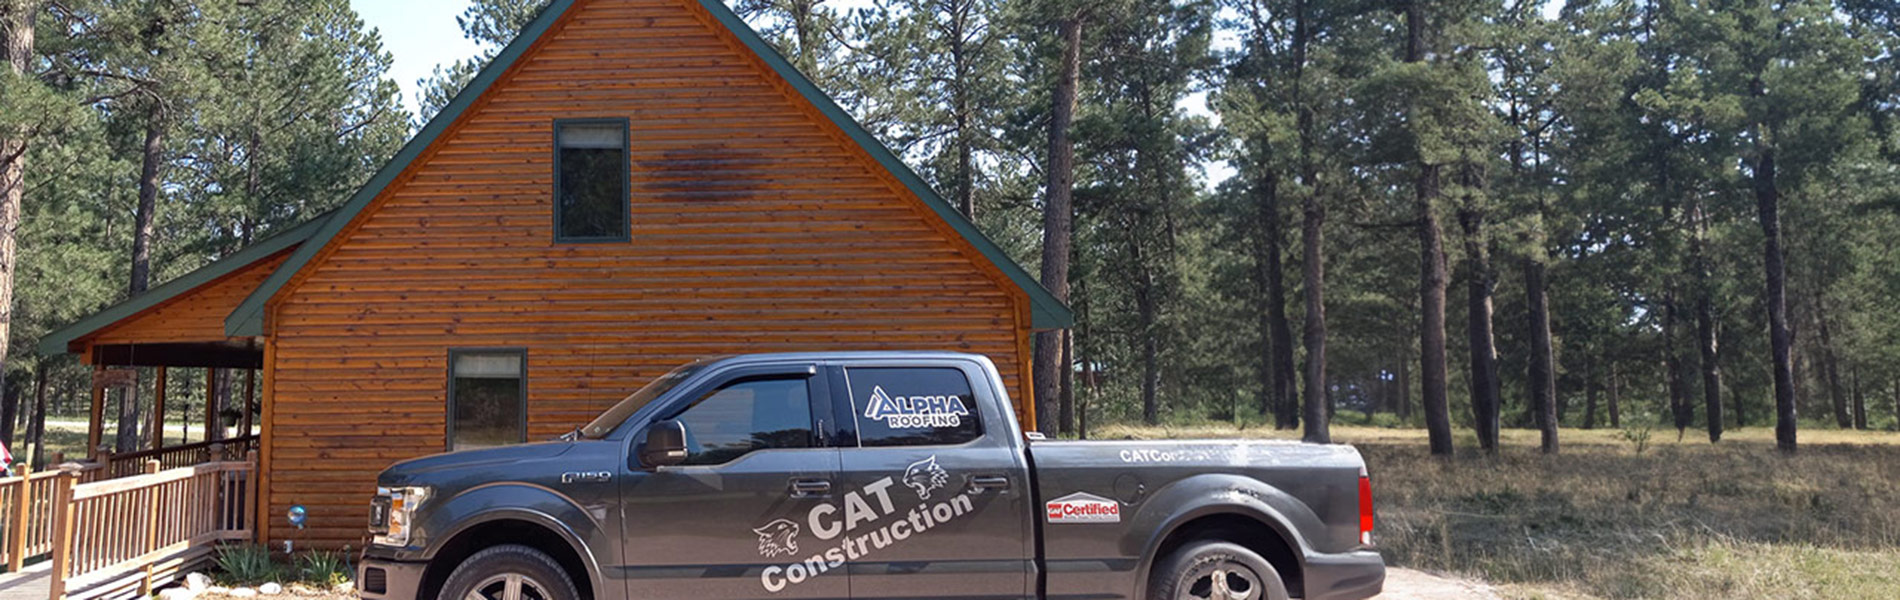 Photo of CAT Construction Inc. truck outside of a newly shingled cabin.